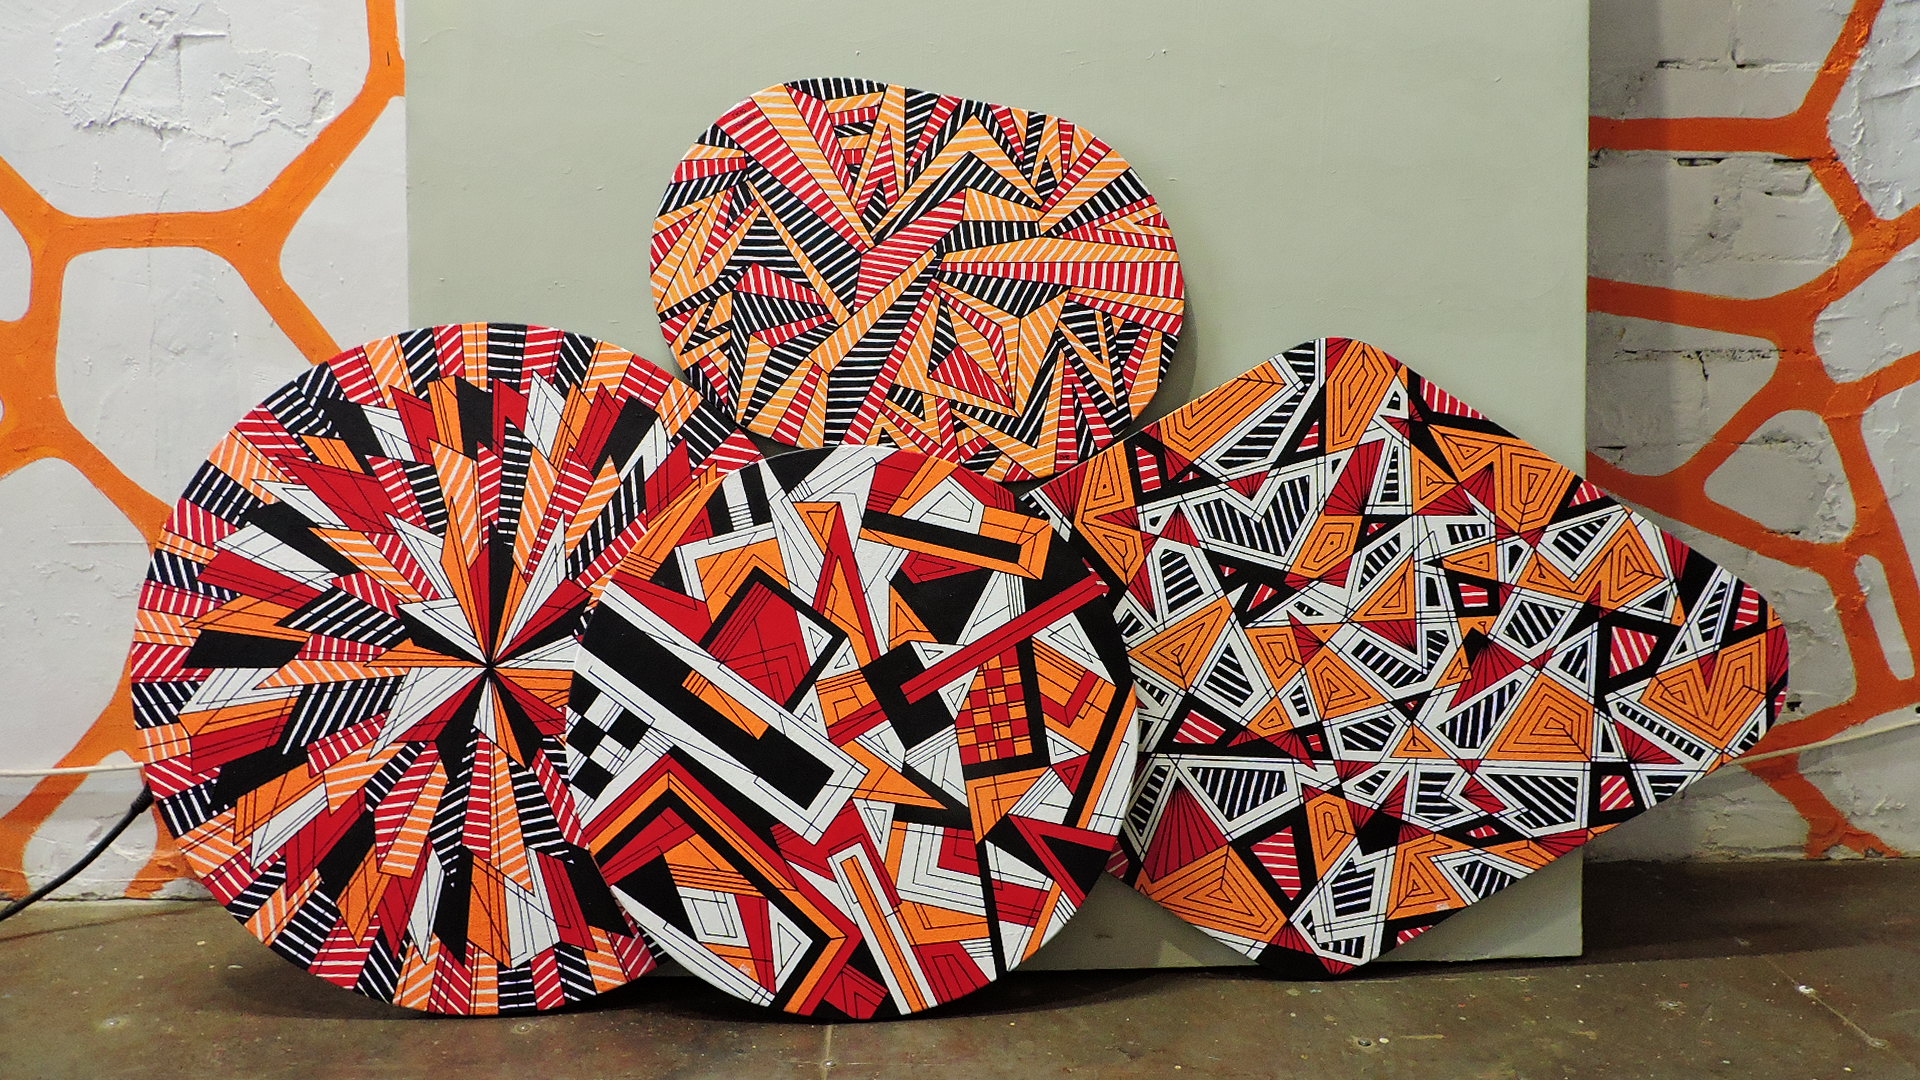 Four paintings of different geometric shapes, United by a common theme and color scheme